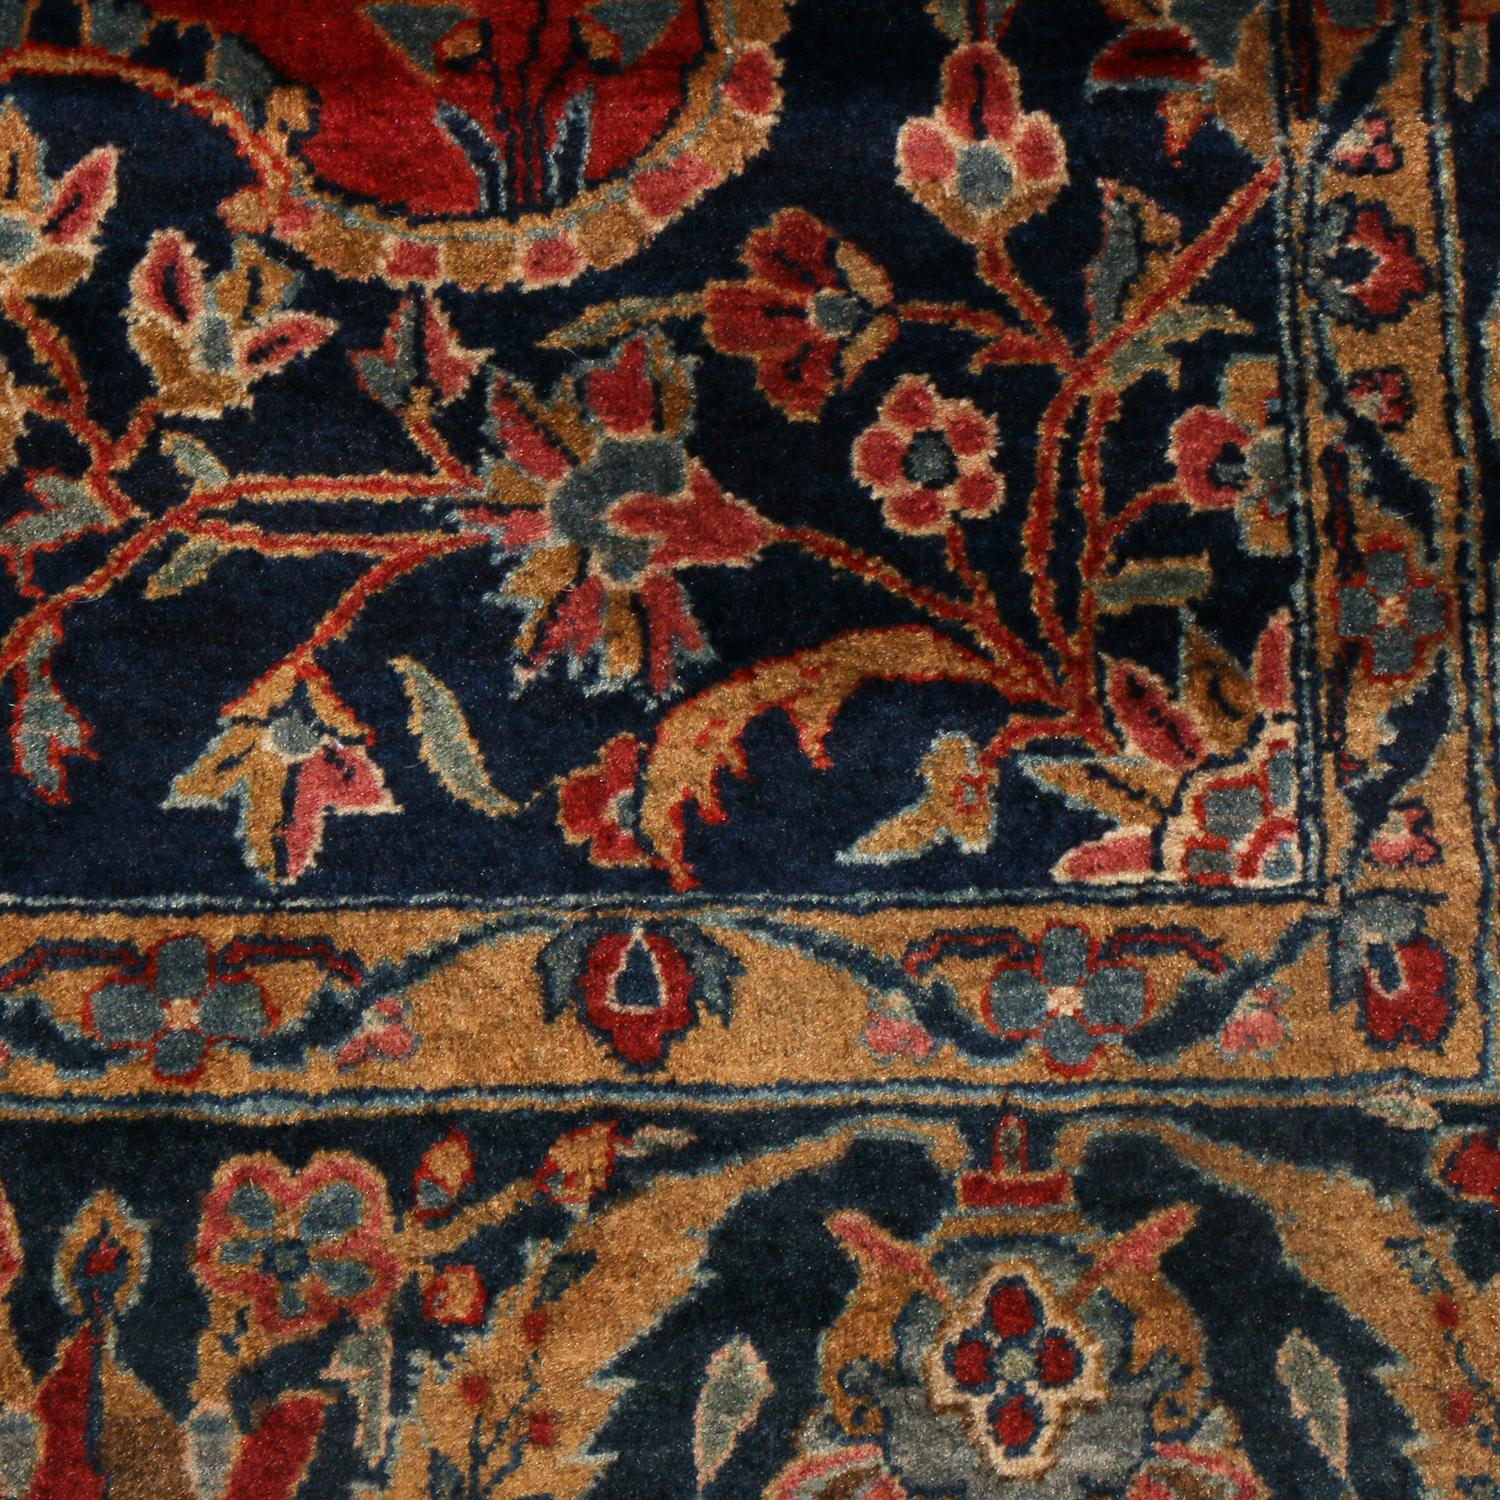 Antique Kashan Traditional Red and Navy Blue Wool Persian Rug by Rug & Kilim In Good Condition For Sale In Long Island City, NY